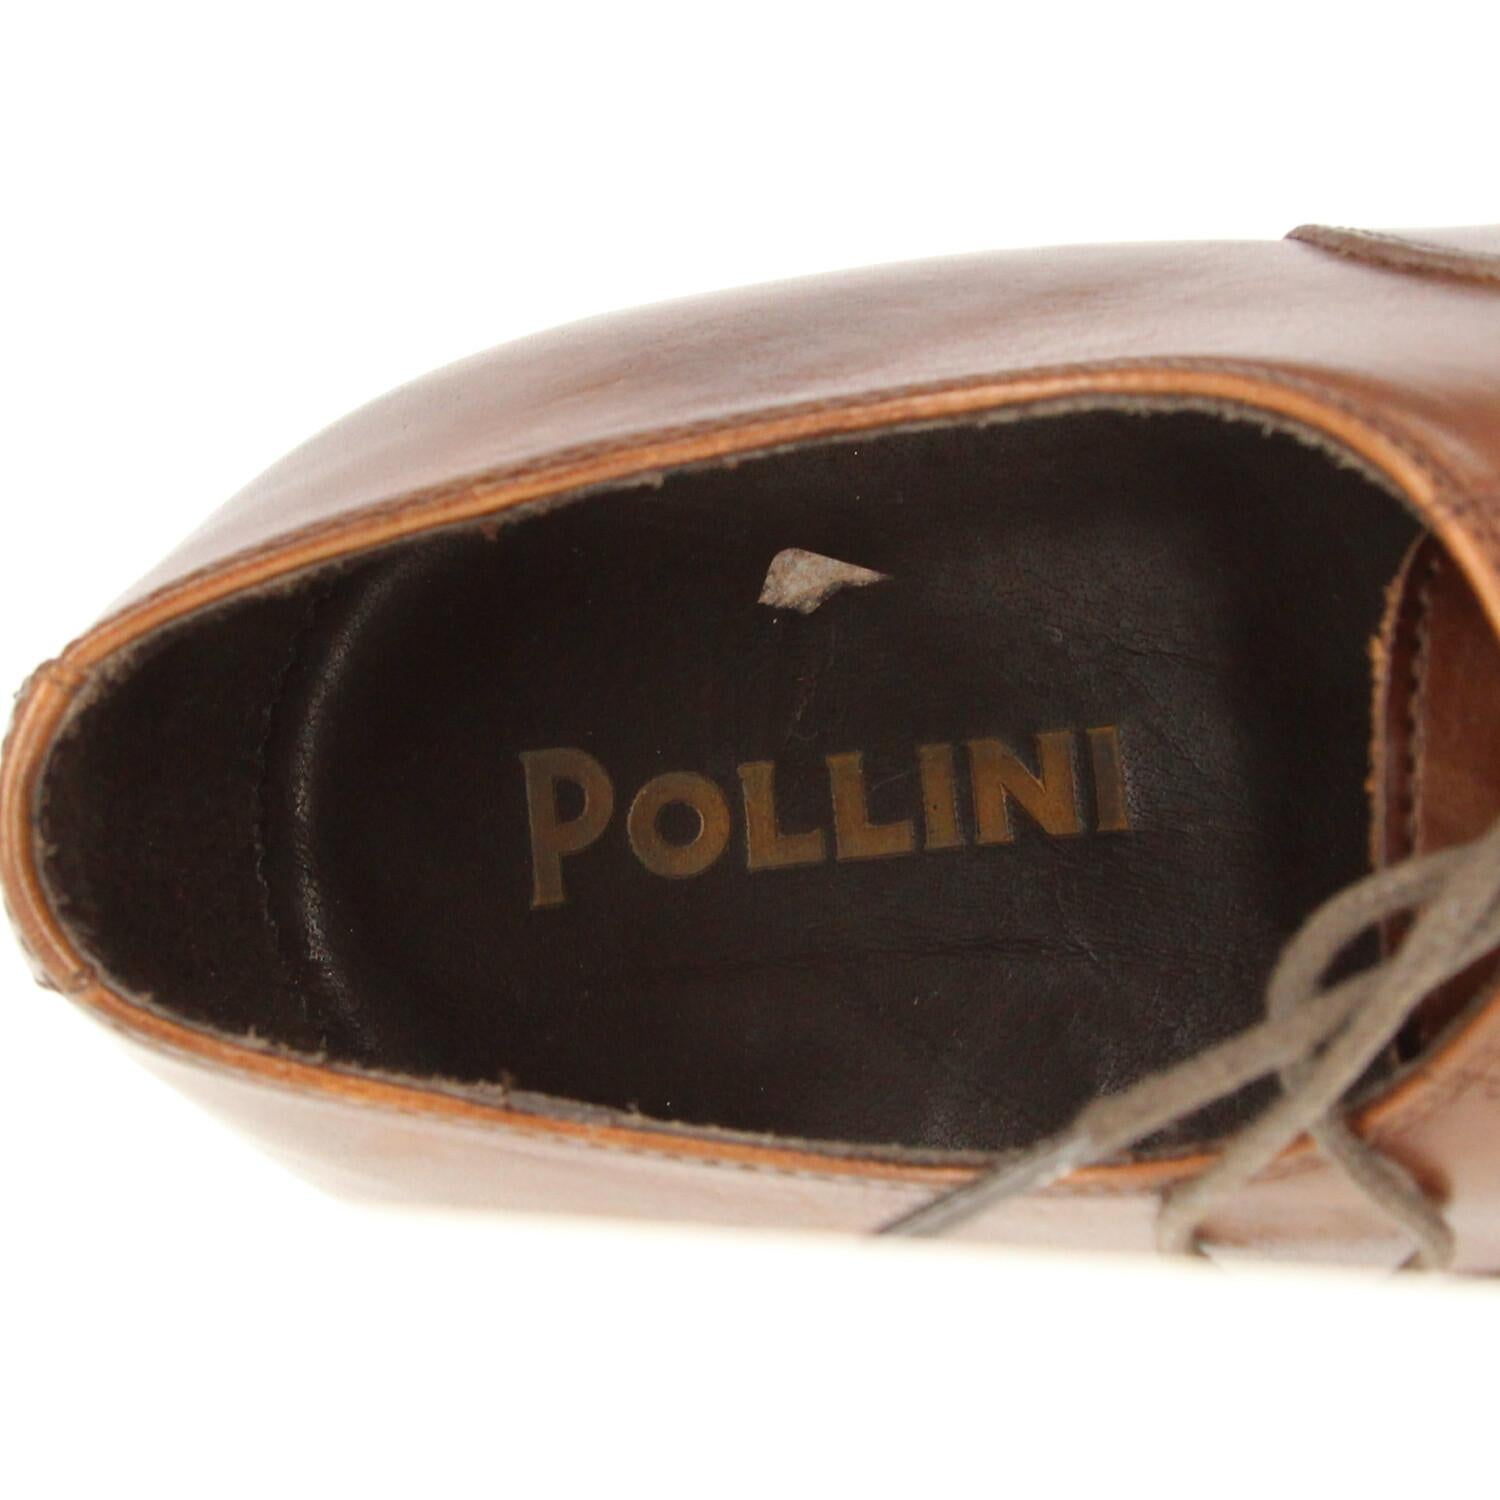 2000s Pollini Leather Lace-up Shoes 4